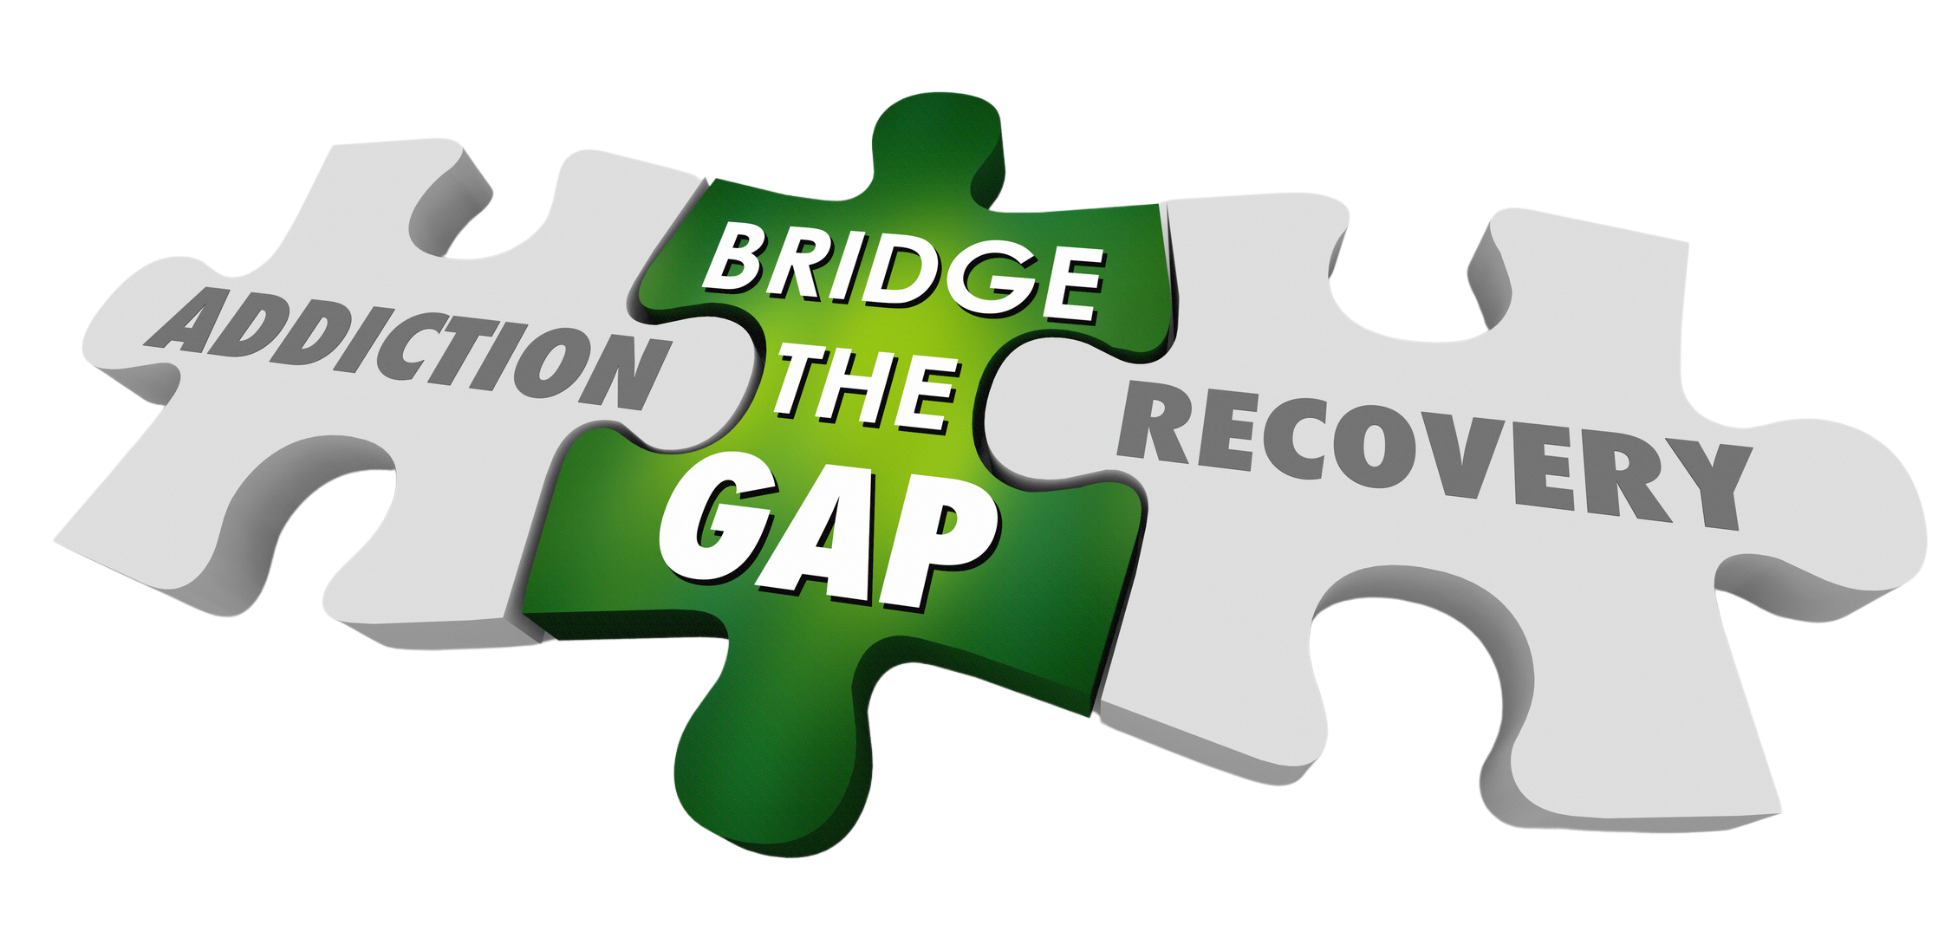 Addiction and recovery bridge the gap